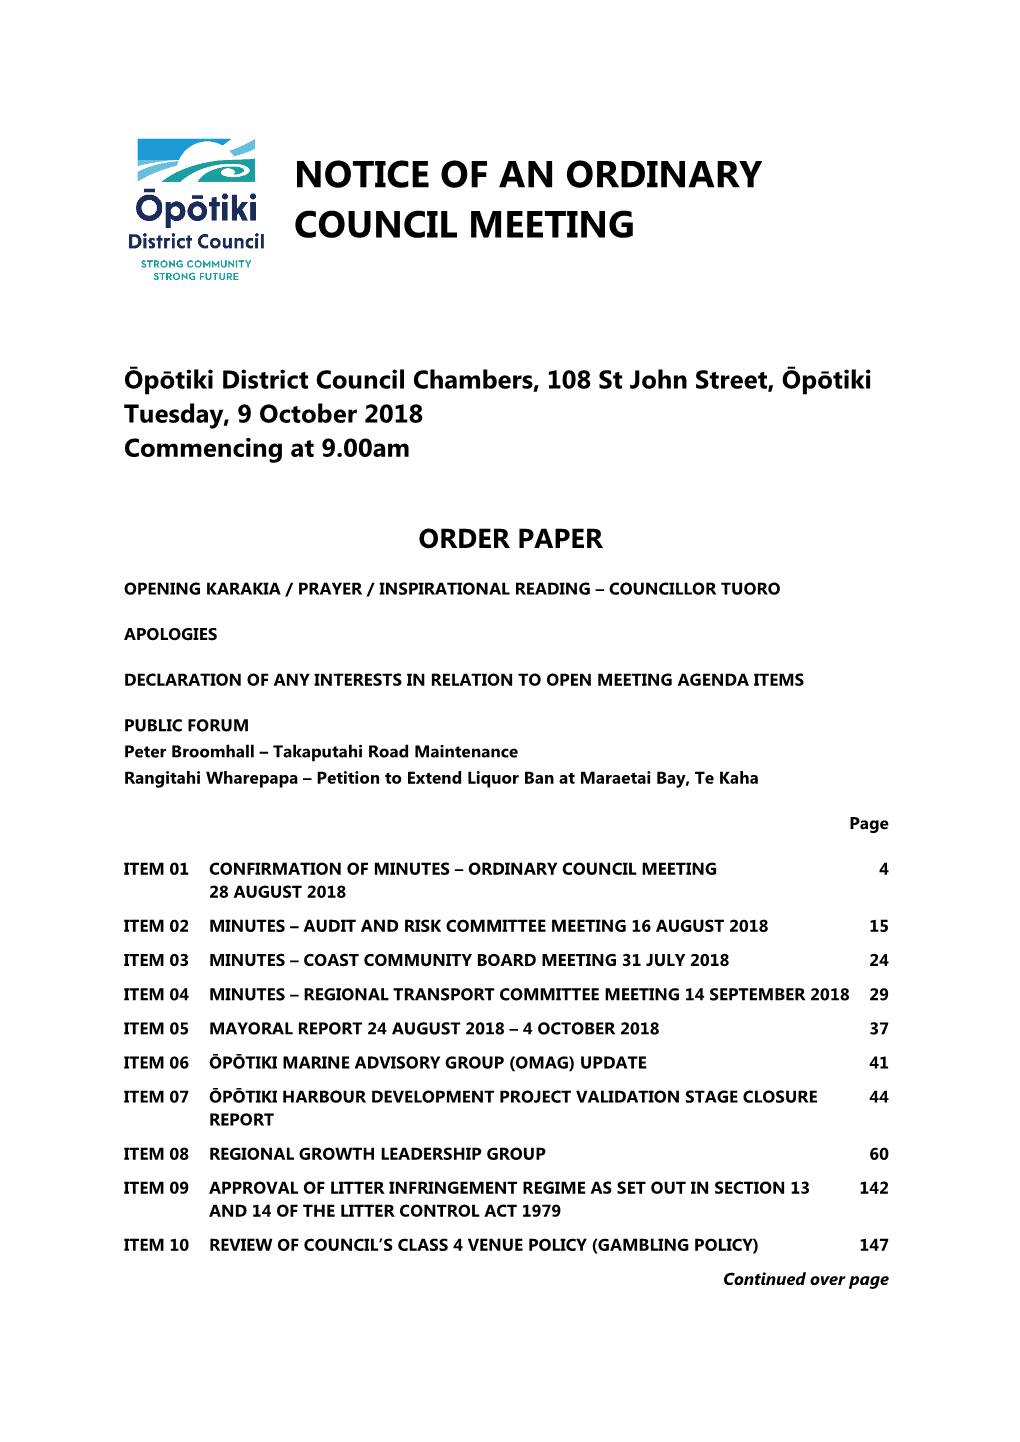 Notice of an Ordinary Council Meeting